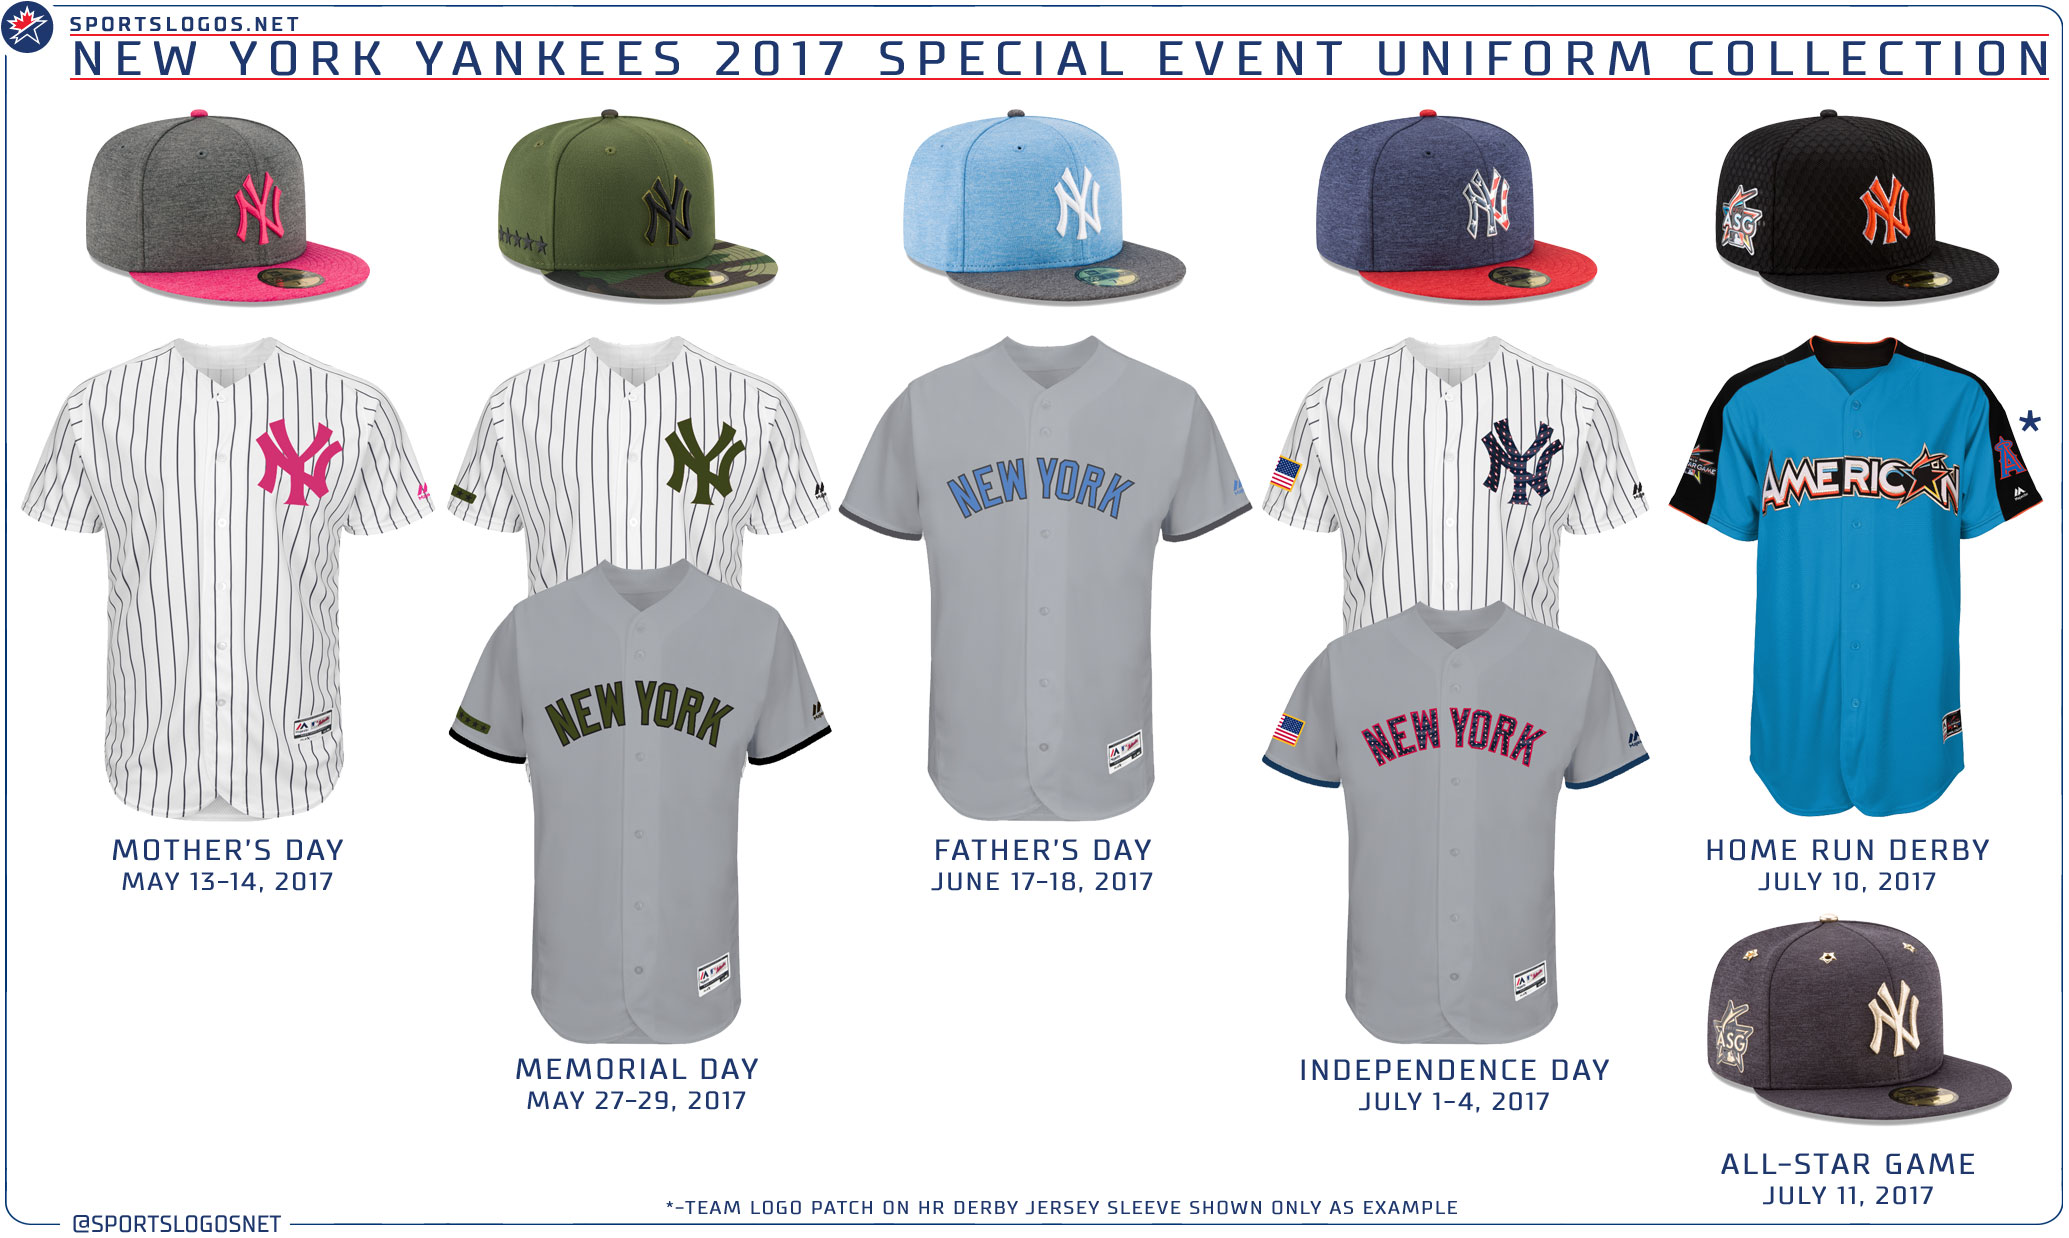 New-York-Yankees-2017-Special-Event-Uniforms.jpg